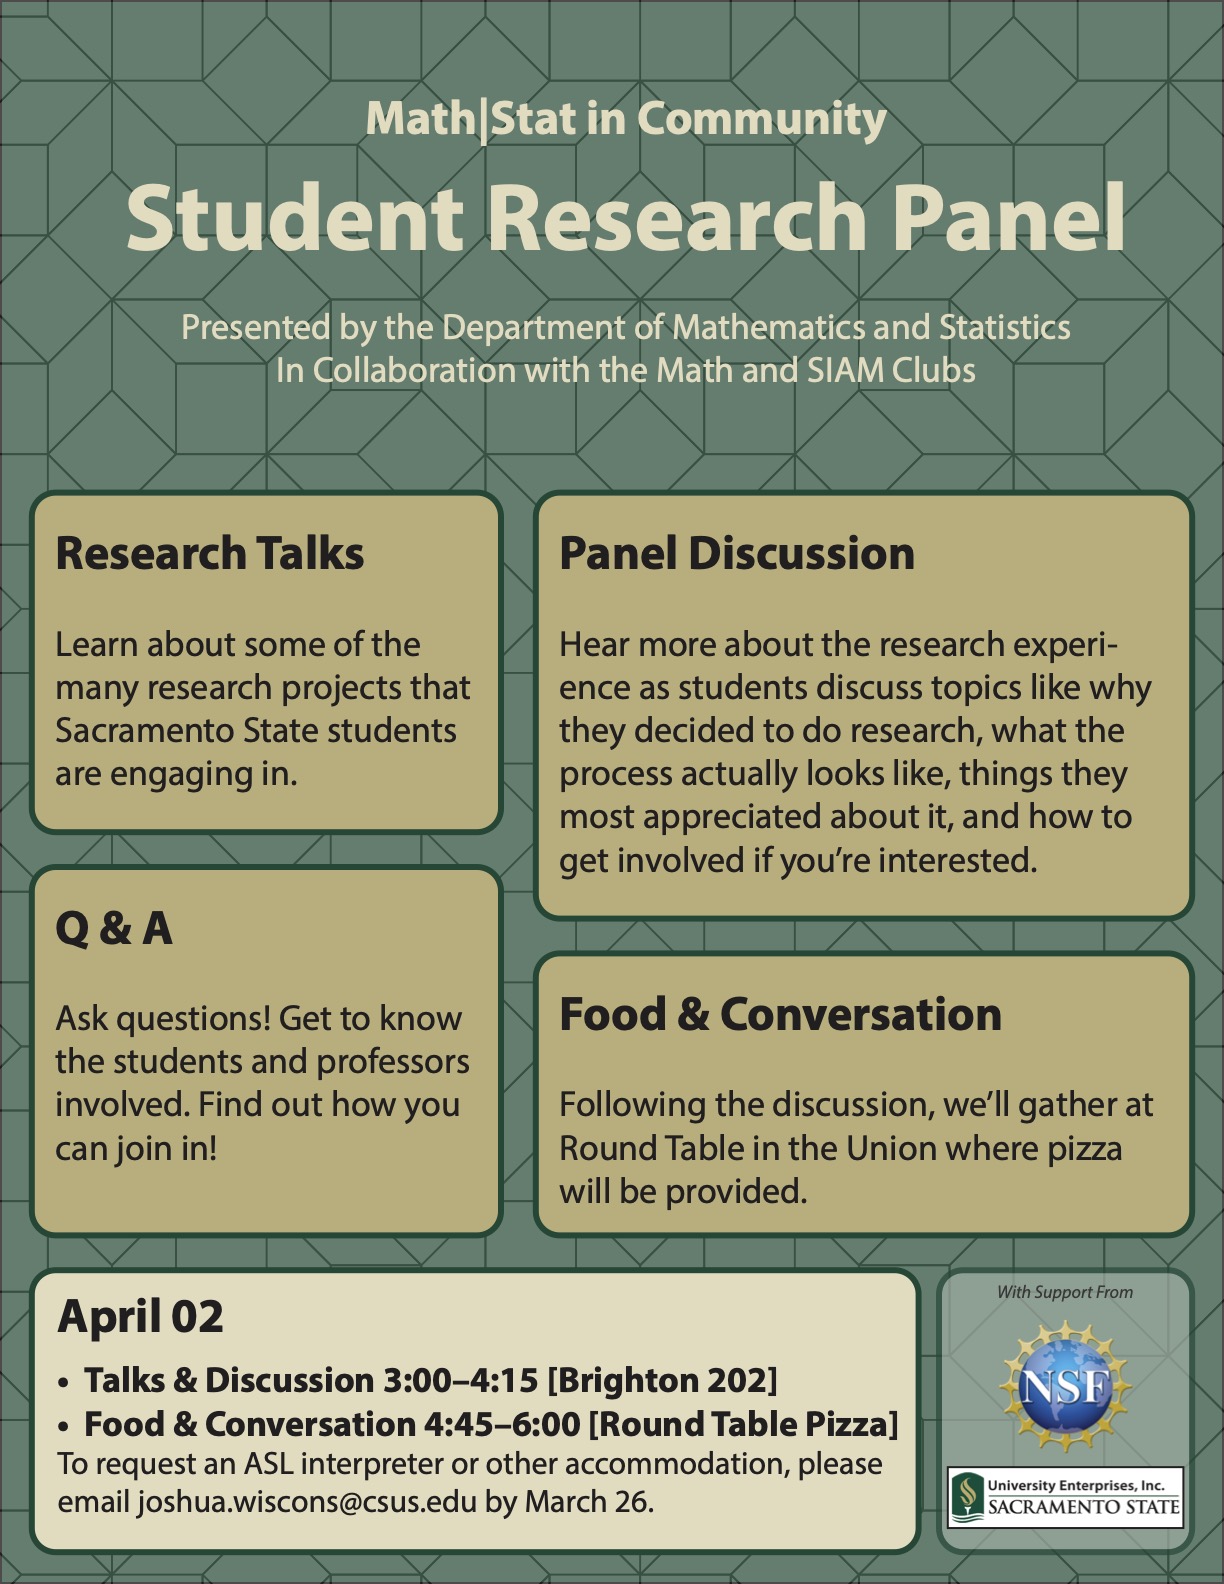 Student Research Panel flyer